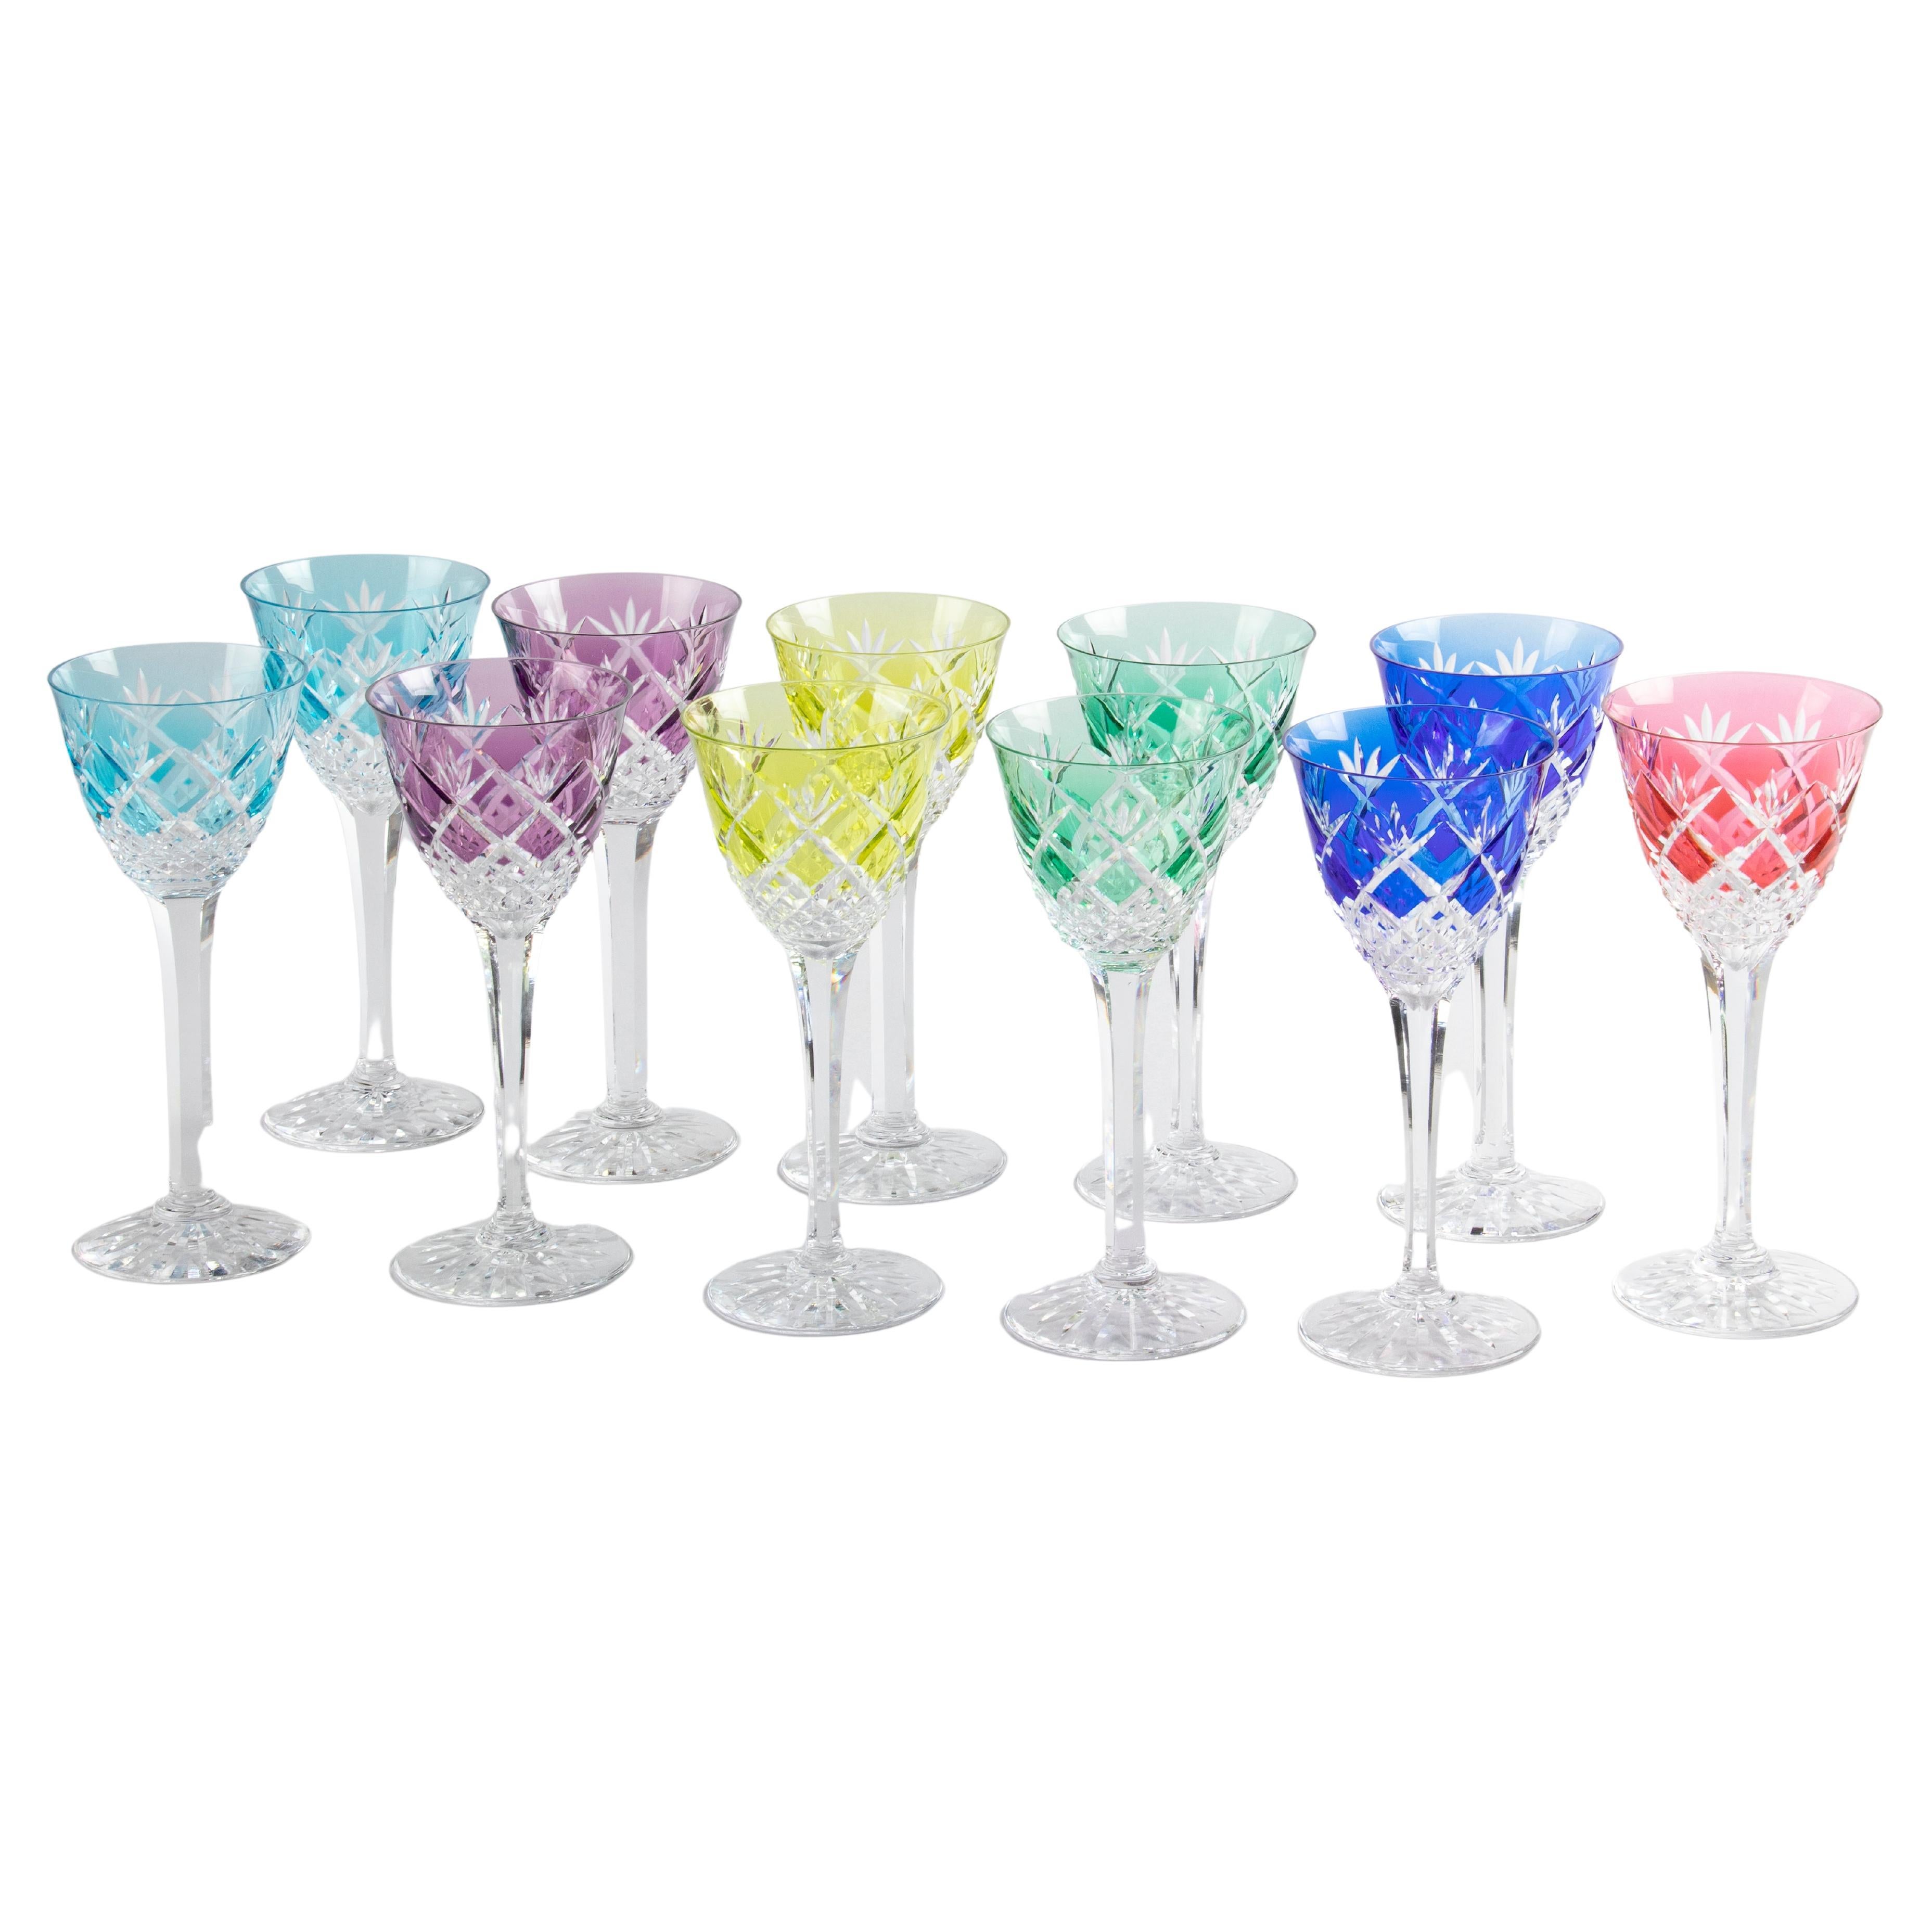 Set of 11 Crystal Colored Wine Glasses